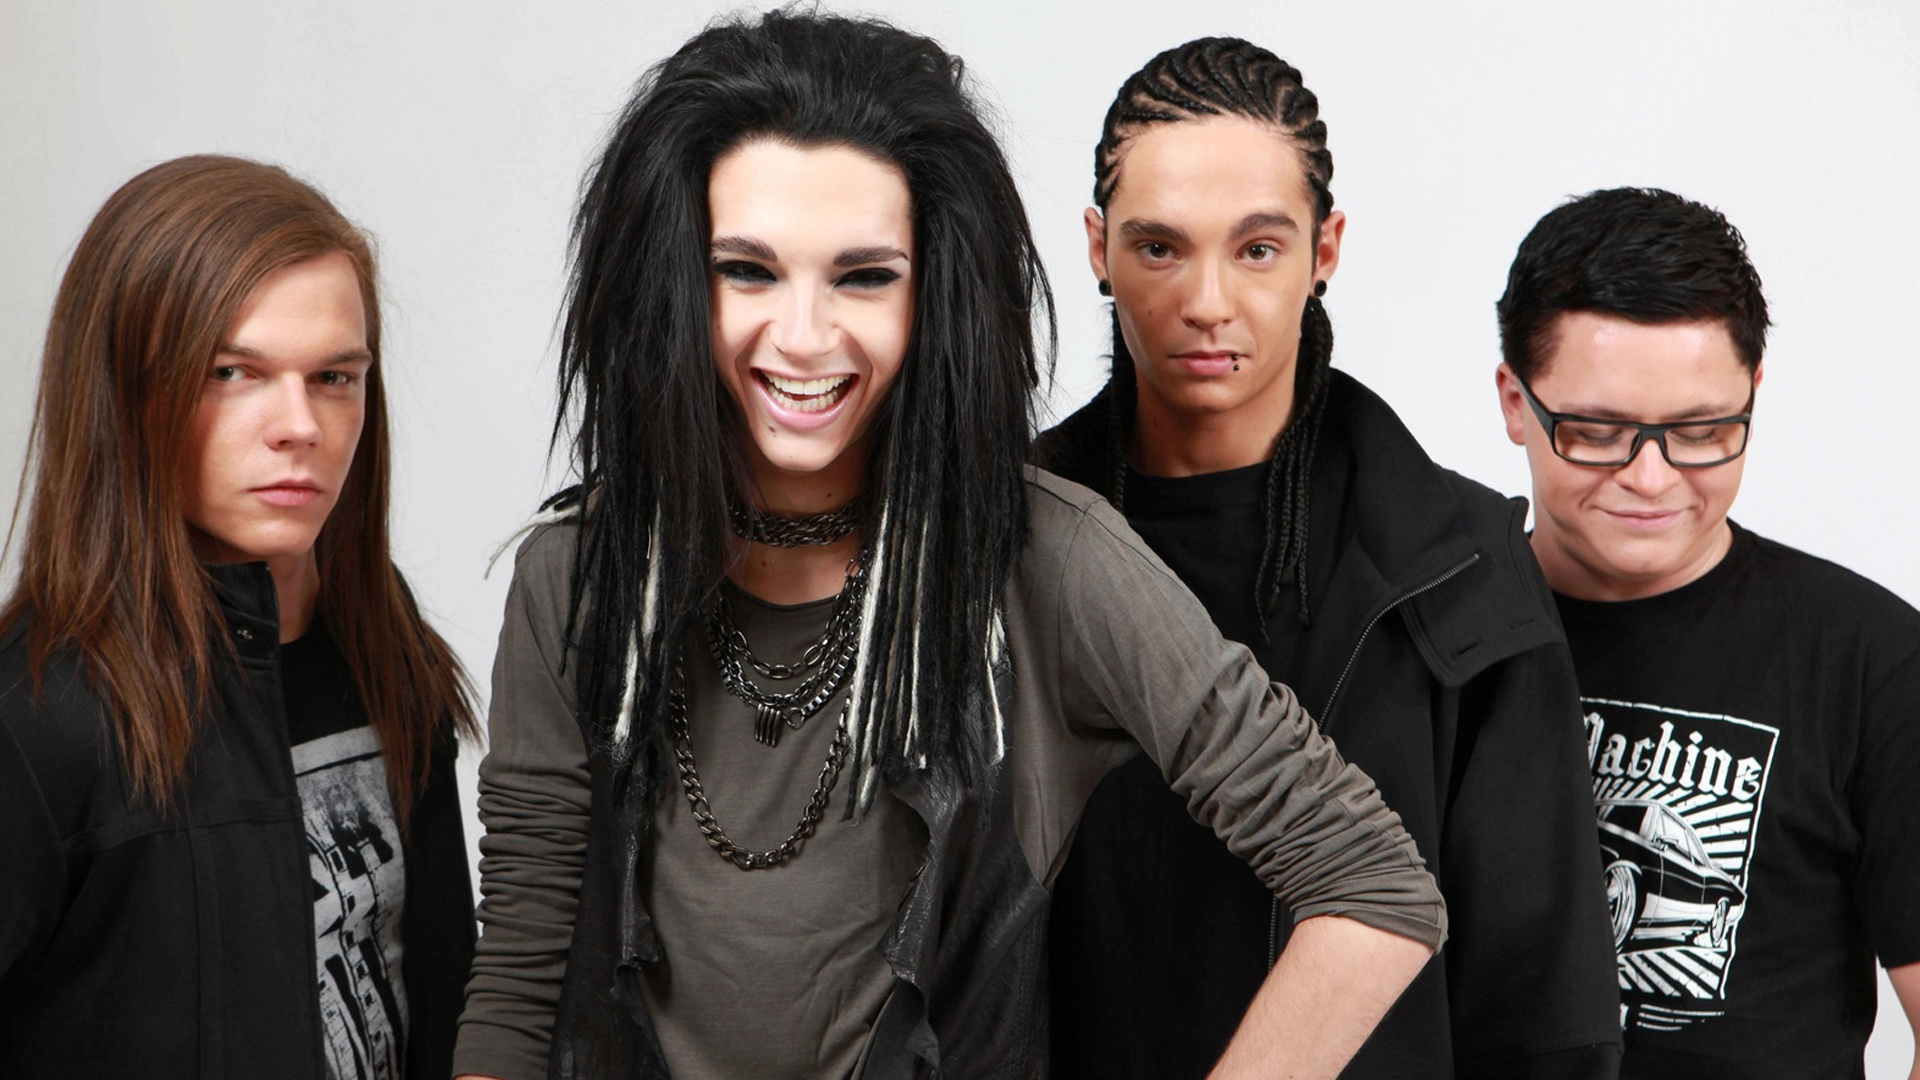 Tokio Hotel: The release of the second German-language album, Zimmer 483, 2007. 1920x1080 Full HD Wallpaper.